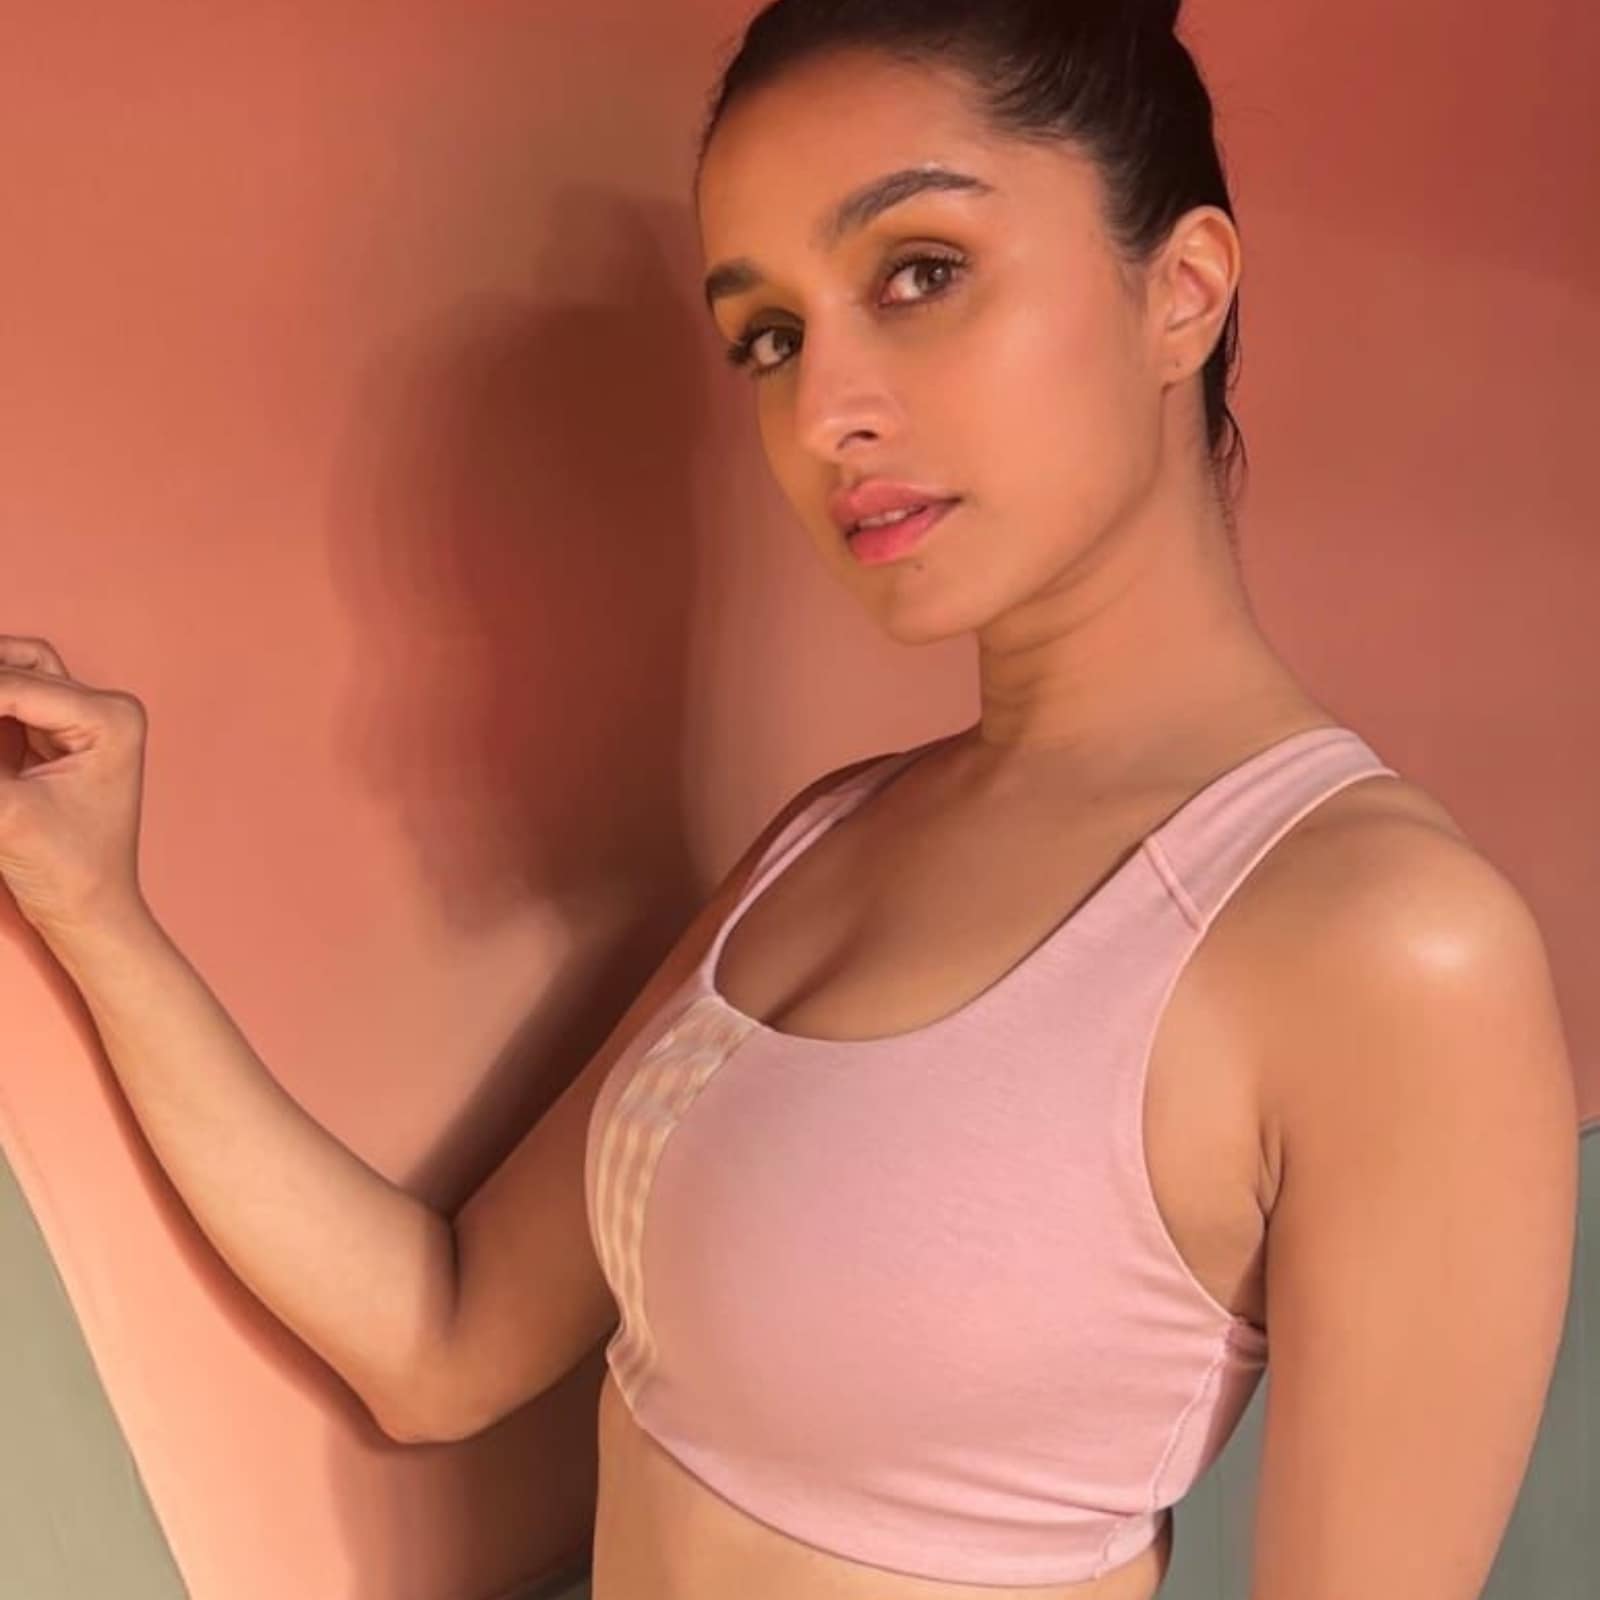 Shraddha Kapoor Hd Photo Sex - Shraddha Kapoor Exudes Ballerina Vibes in Her Latest Instagram Post, Check  It Out - News18